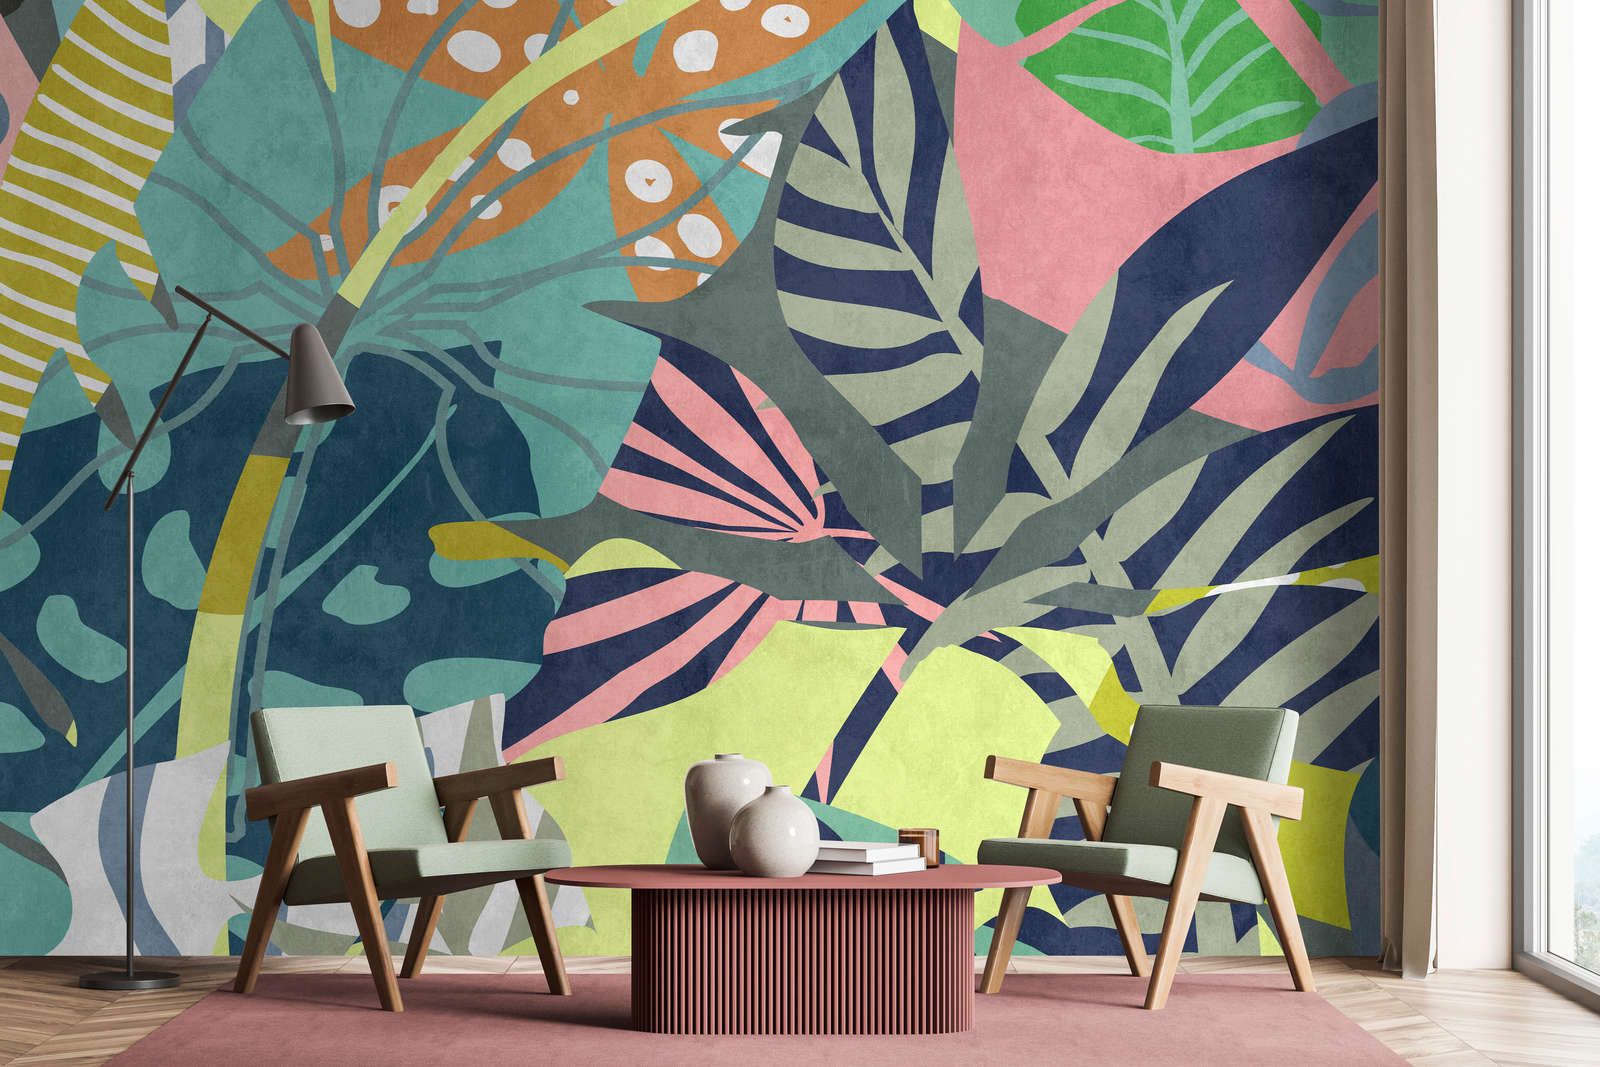             Photo wallpaper »anais 1« - Abstract jungle leaves on concrete plaster texture - Colourful | matt, smooth non-woven
        